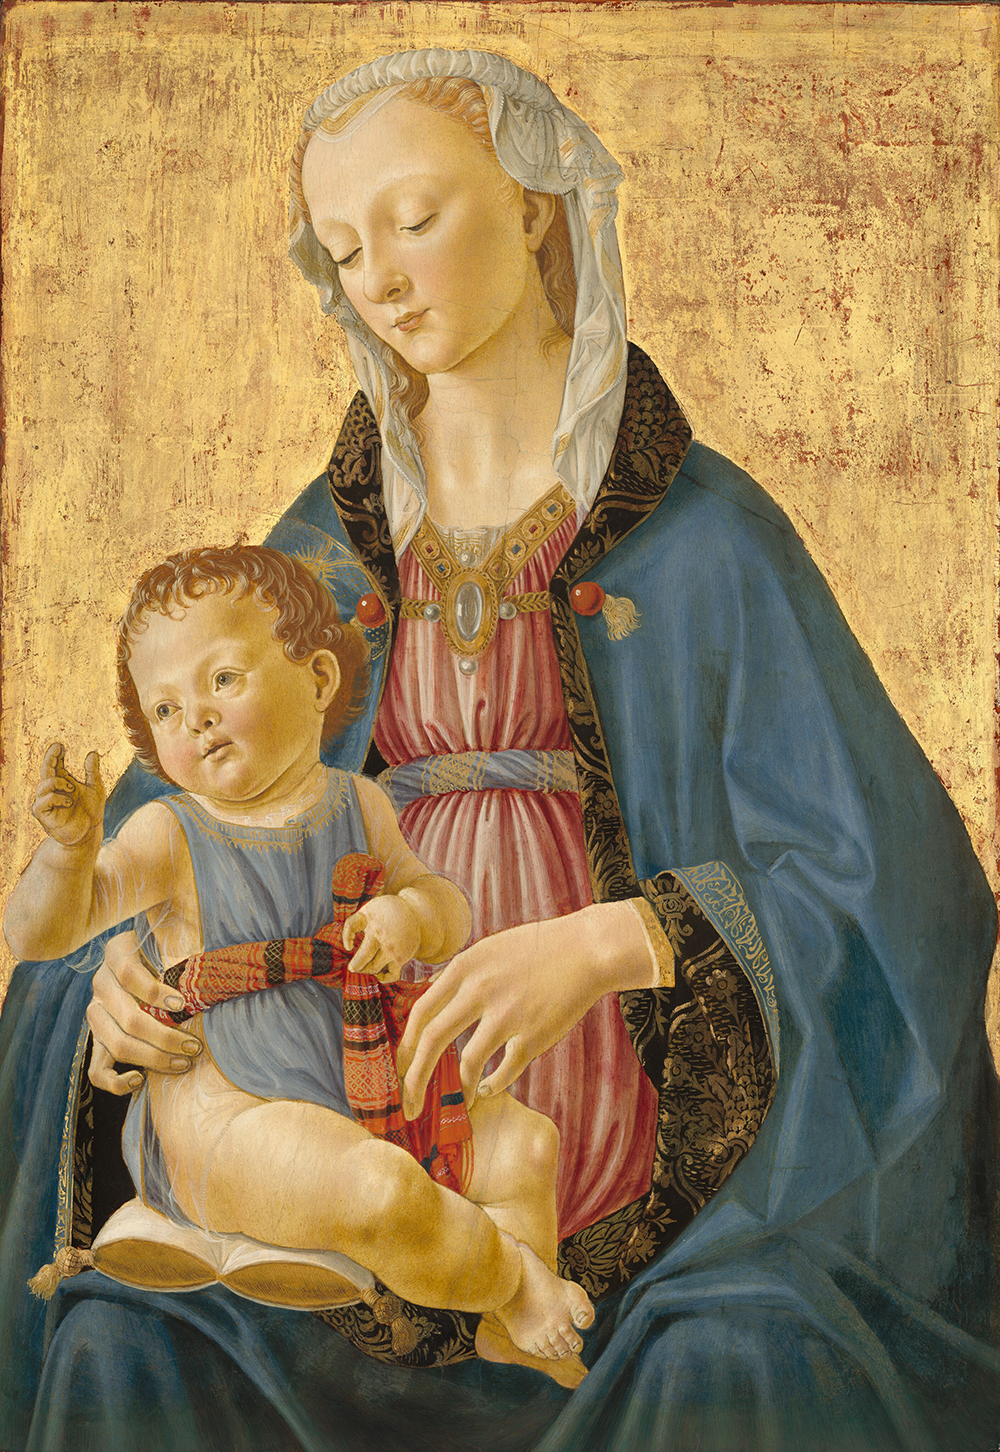 Against a gold background, a blond woman is shown from the lap up, facing us as she holds and looks down at a plump baby sitting on a gold and white pillow on her right thigh, to our left, in this vertical painting.